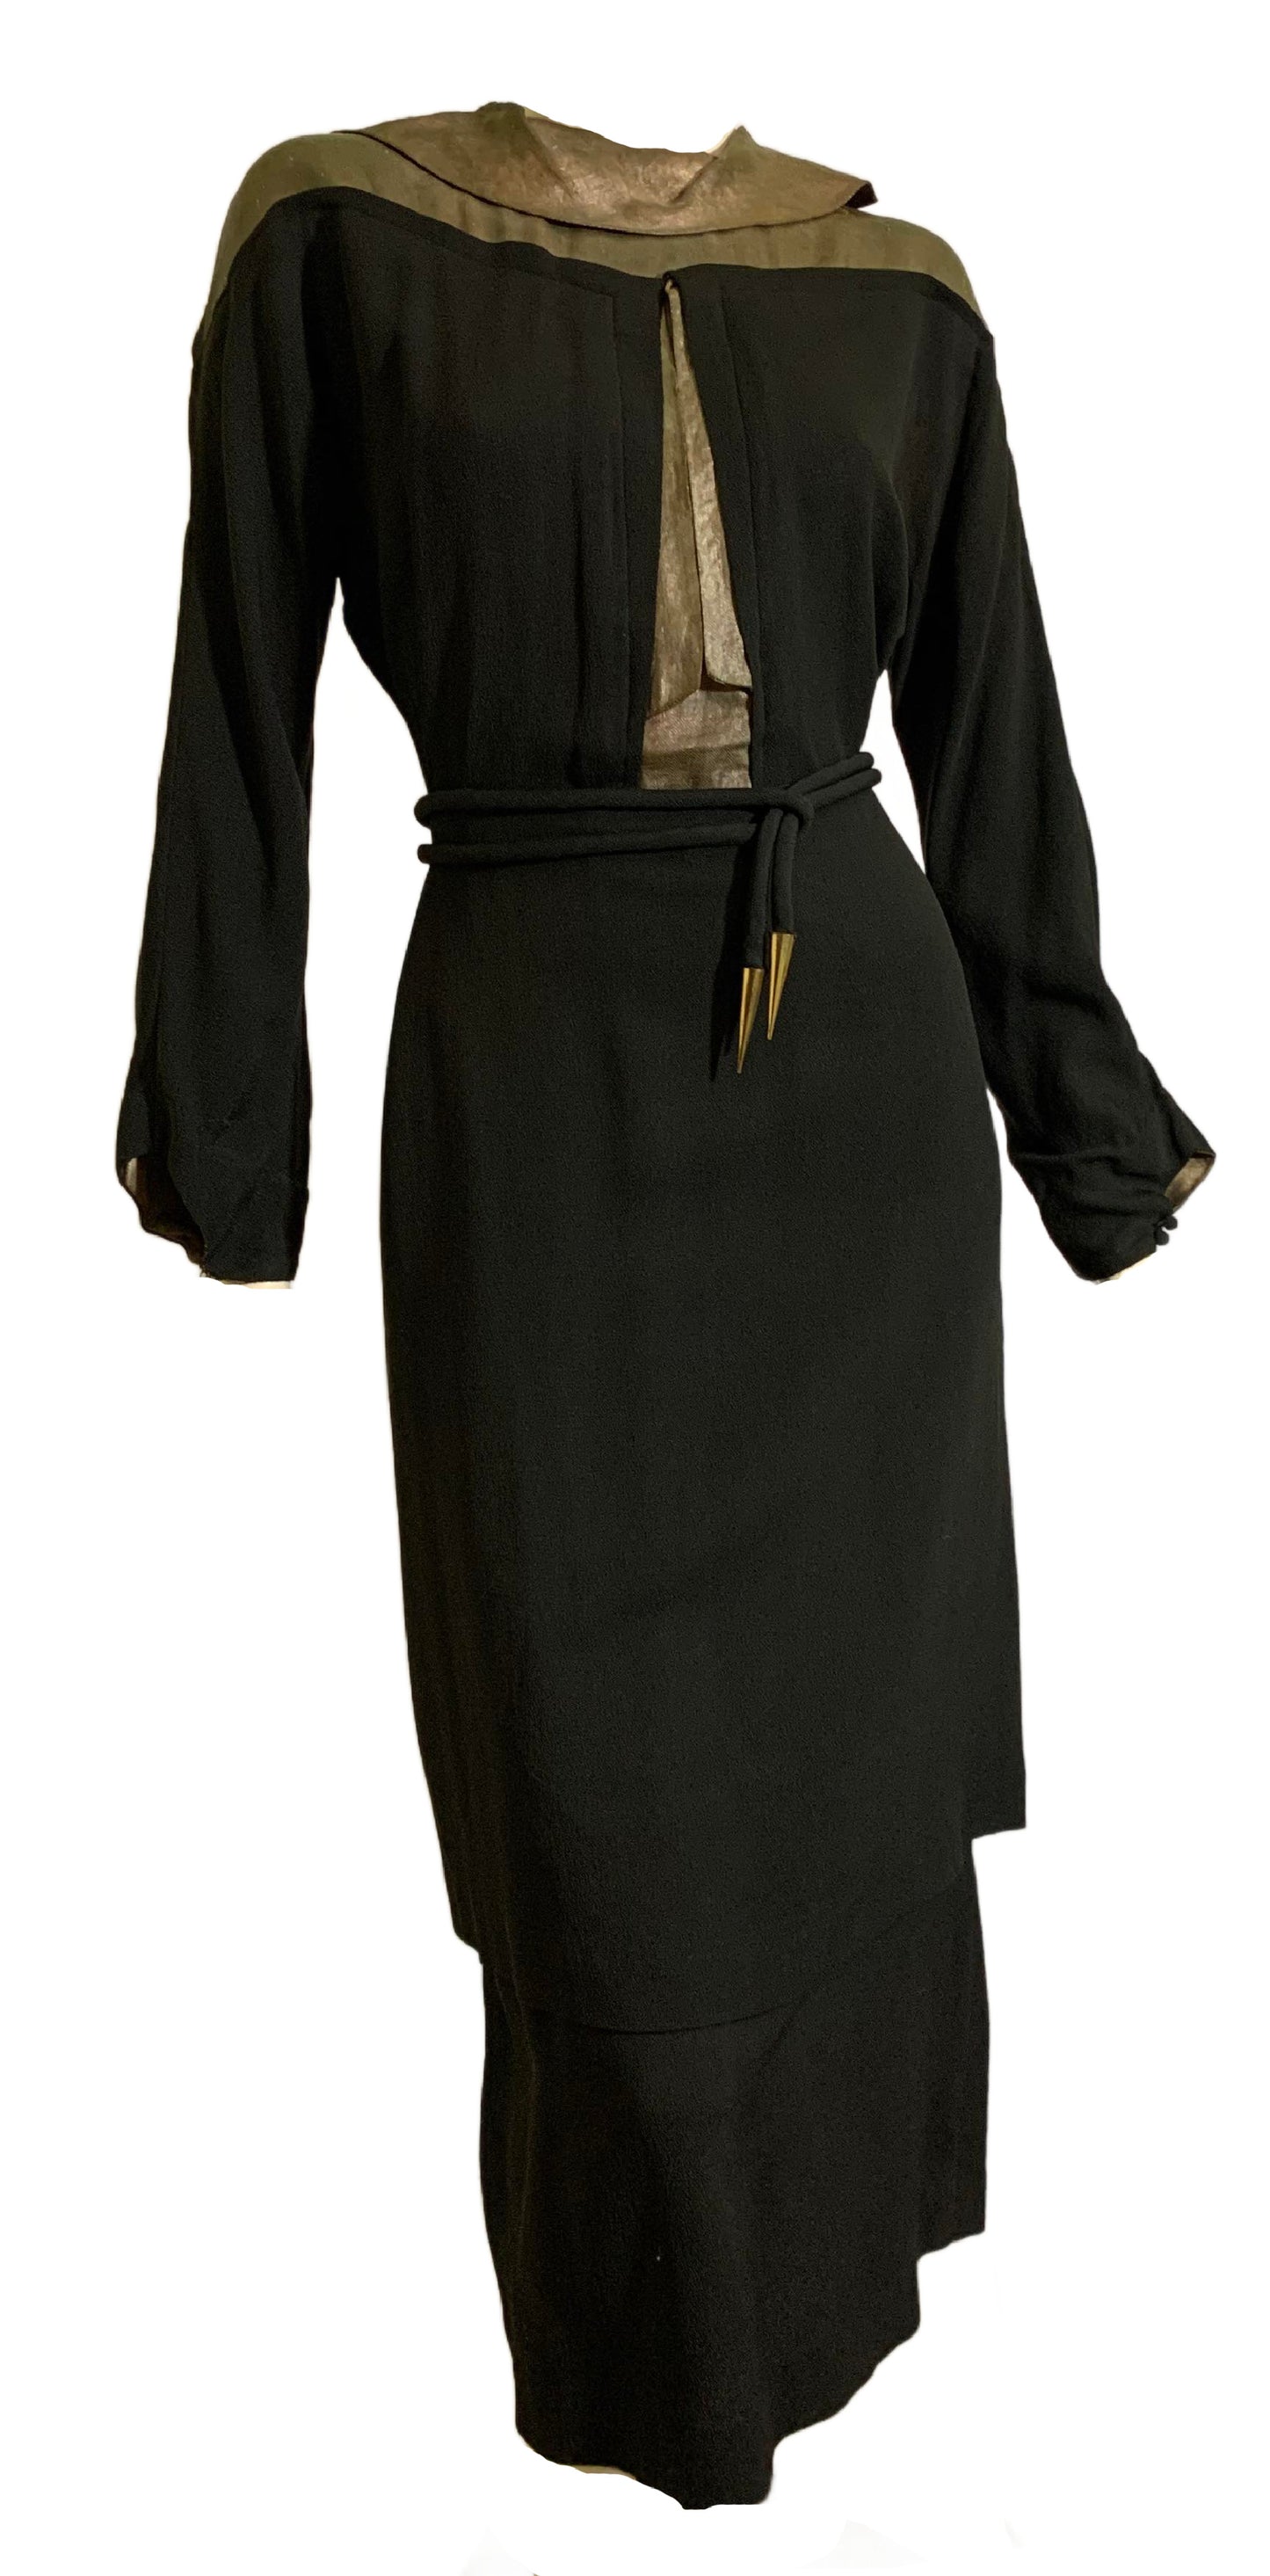 Black Crepe Rayon Evening Dress with Real Gold Metal Woven Accents circa 1930s